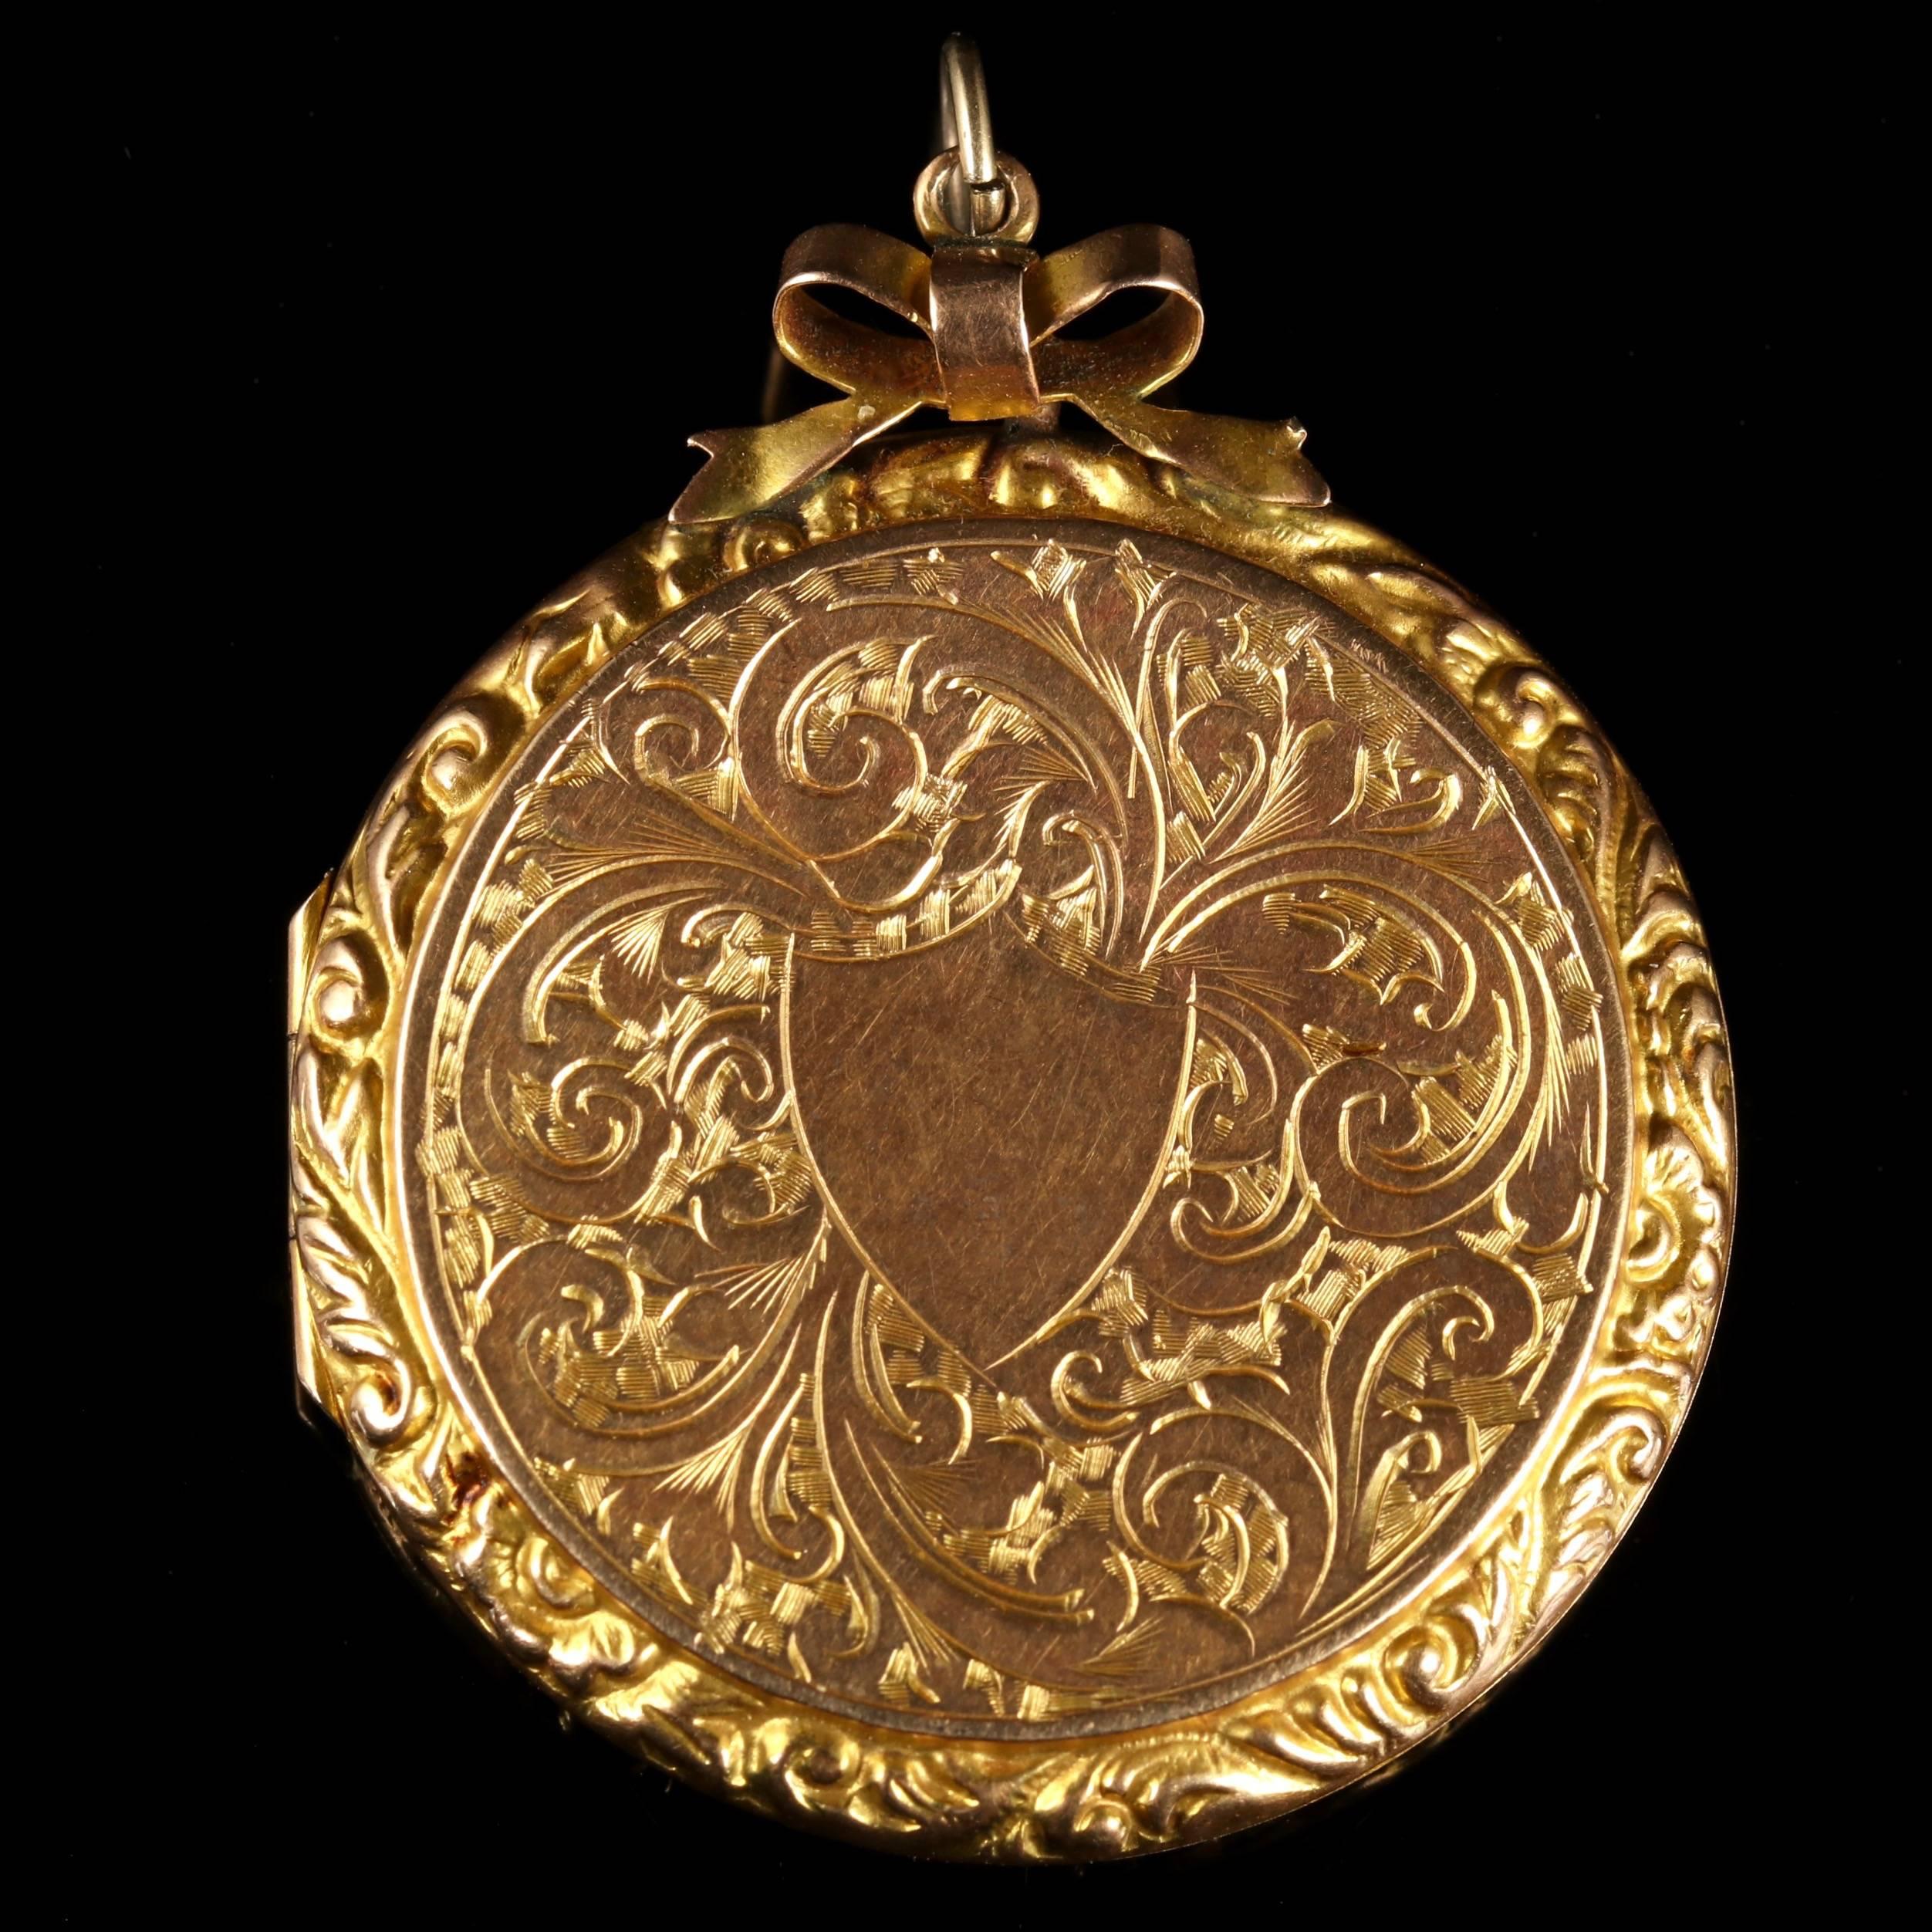 This fabulous Victorian 9ct Gold locket is Circa 1880.

The locket is engraved with beautiful engravings showing lovely Victorian workmanship.

Engravings can also be seen around the outer edge of the locket too.

A pretty bow around the bale